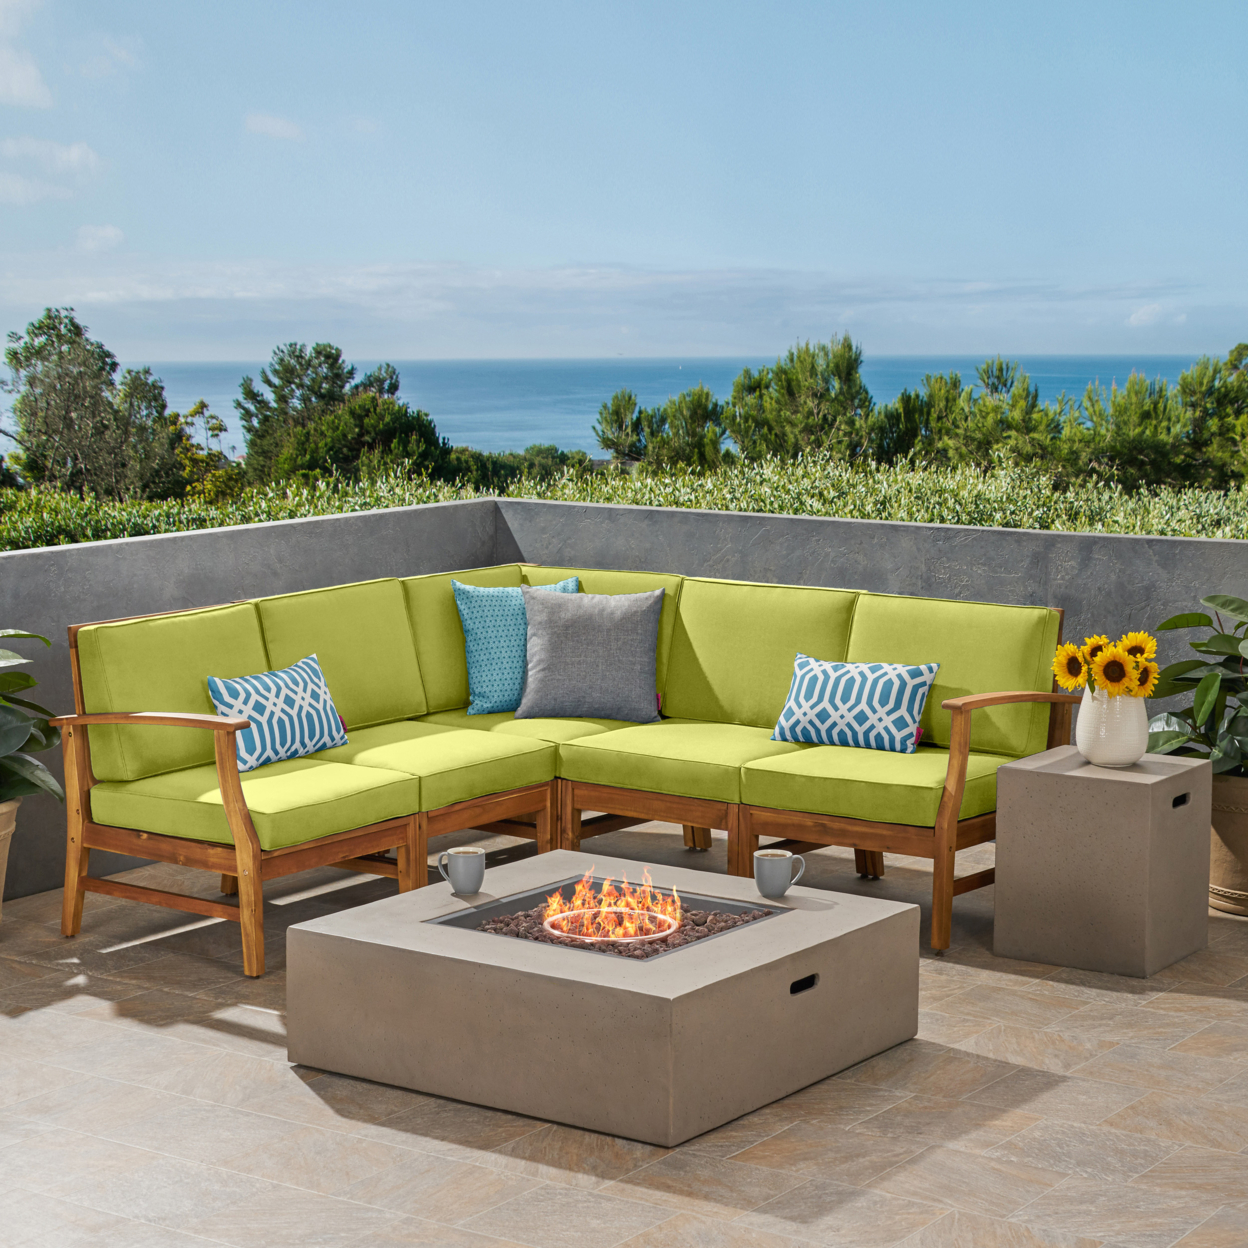 Esther Outdoor 5 Seater V-Shaped Acacia Wood Sofa Set With Square Fire Pit - Teak + Blue + Light Gray